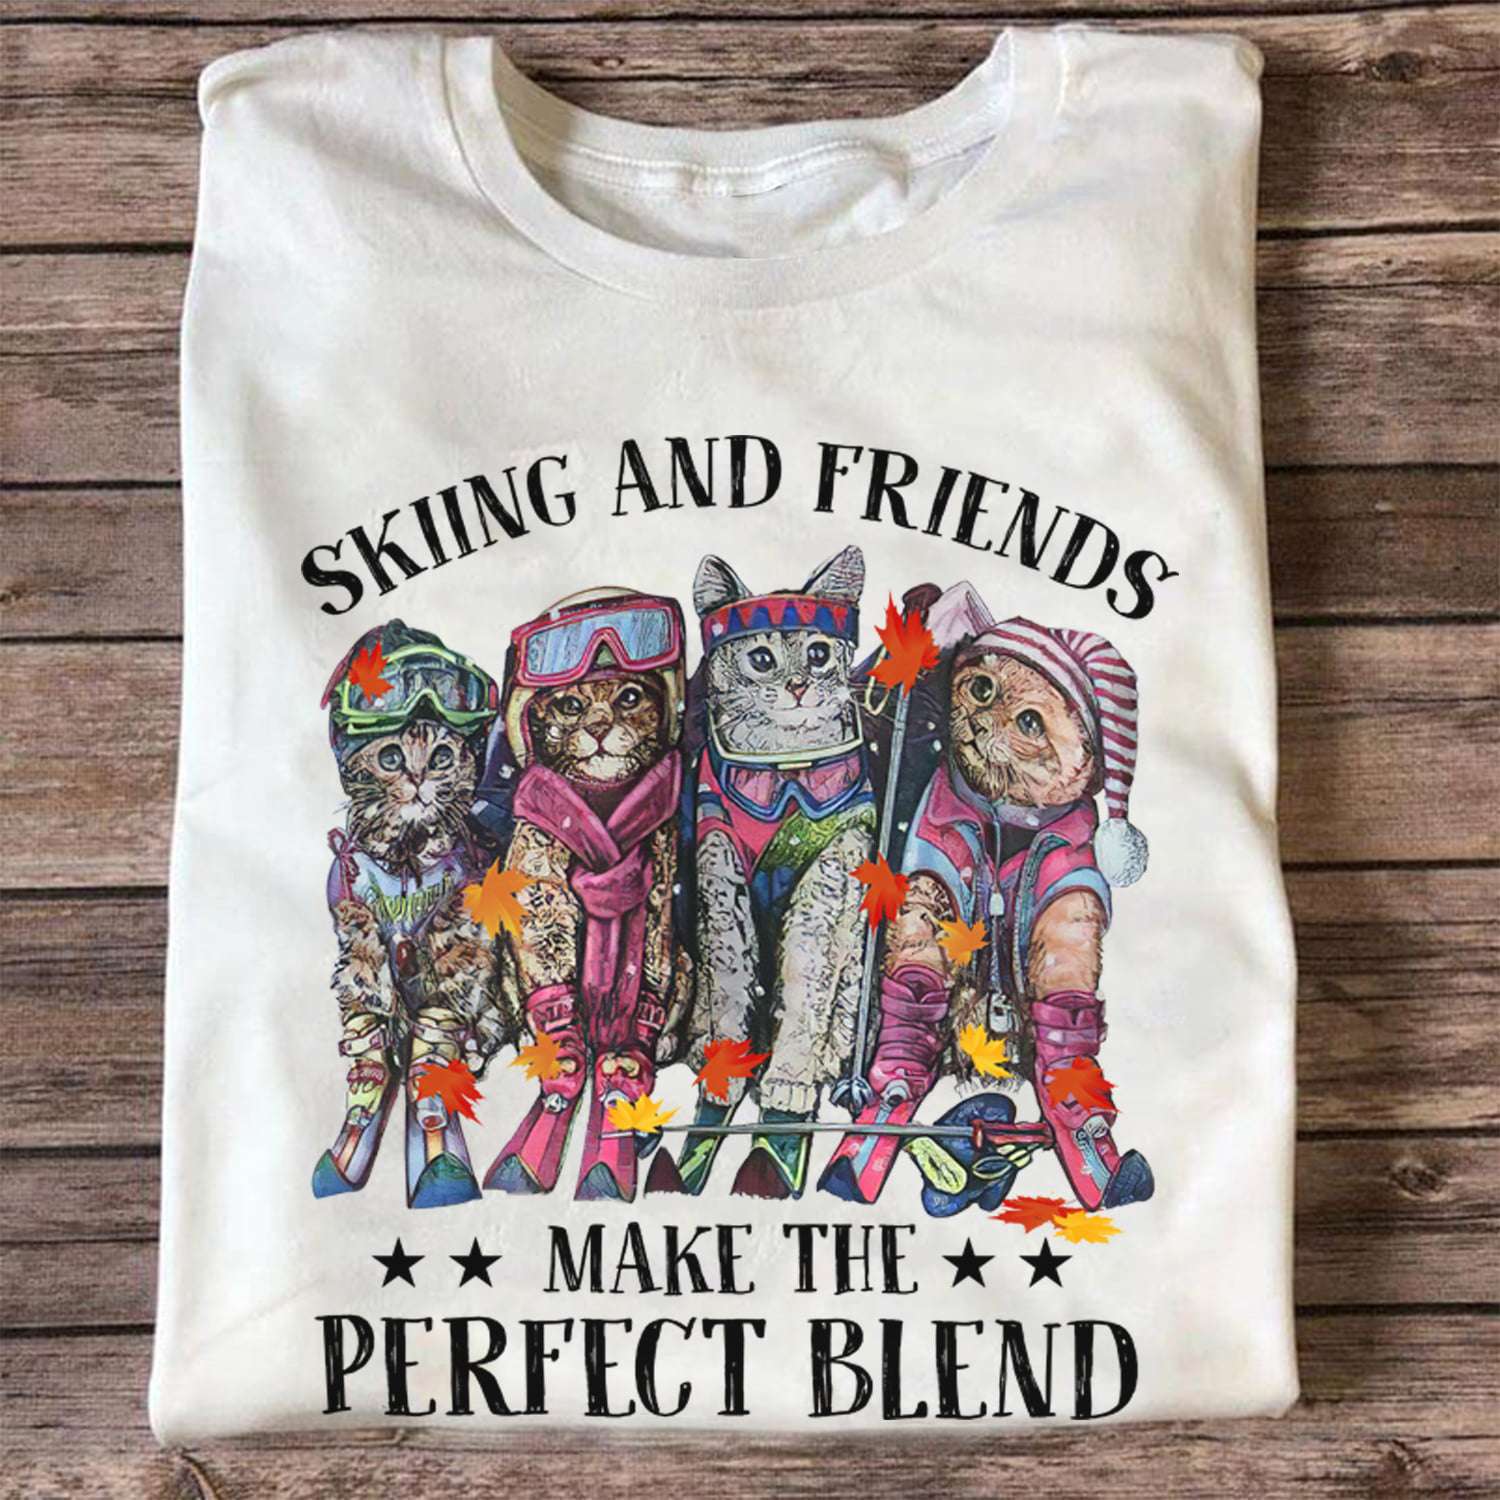 Skiing and friends make the perfect blend - Cat skiers, cat friends go skiing